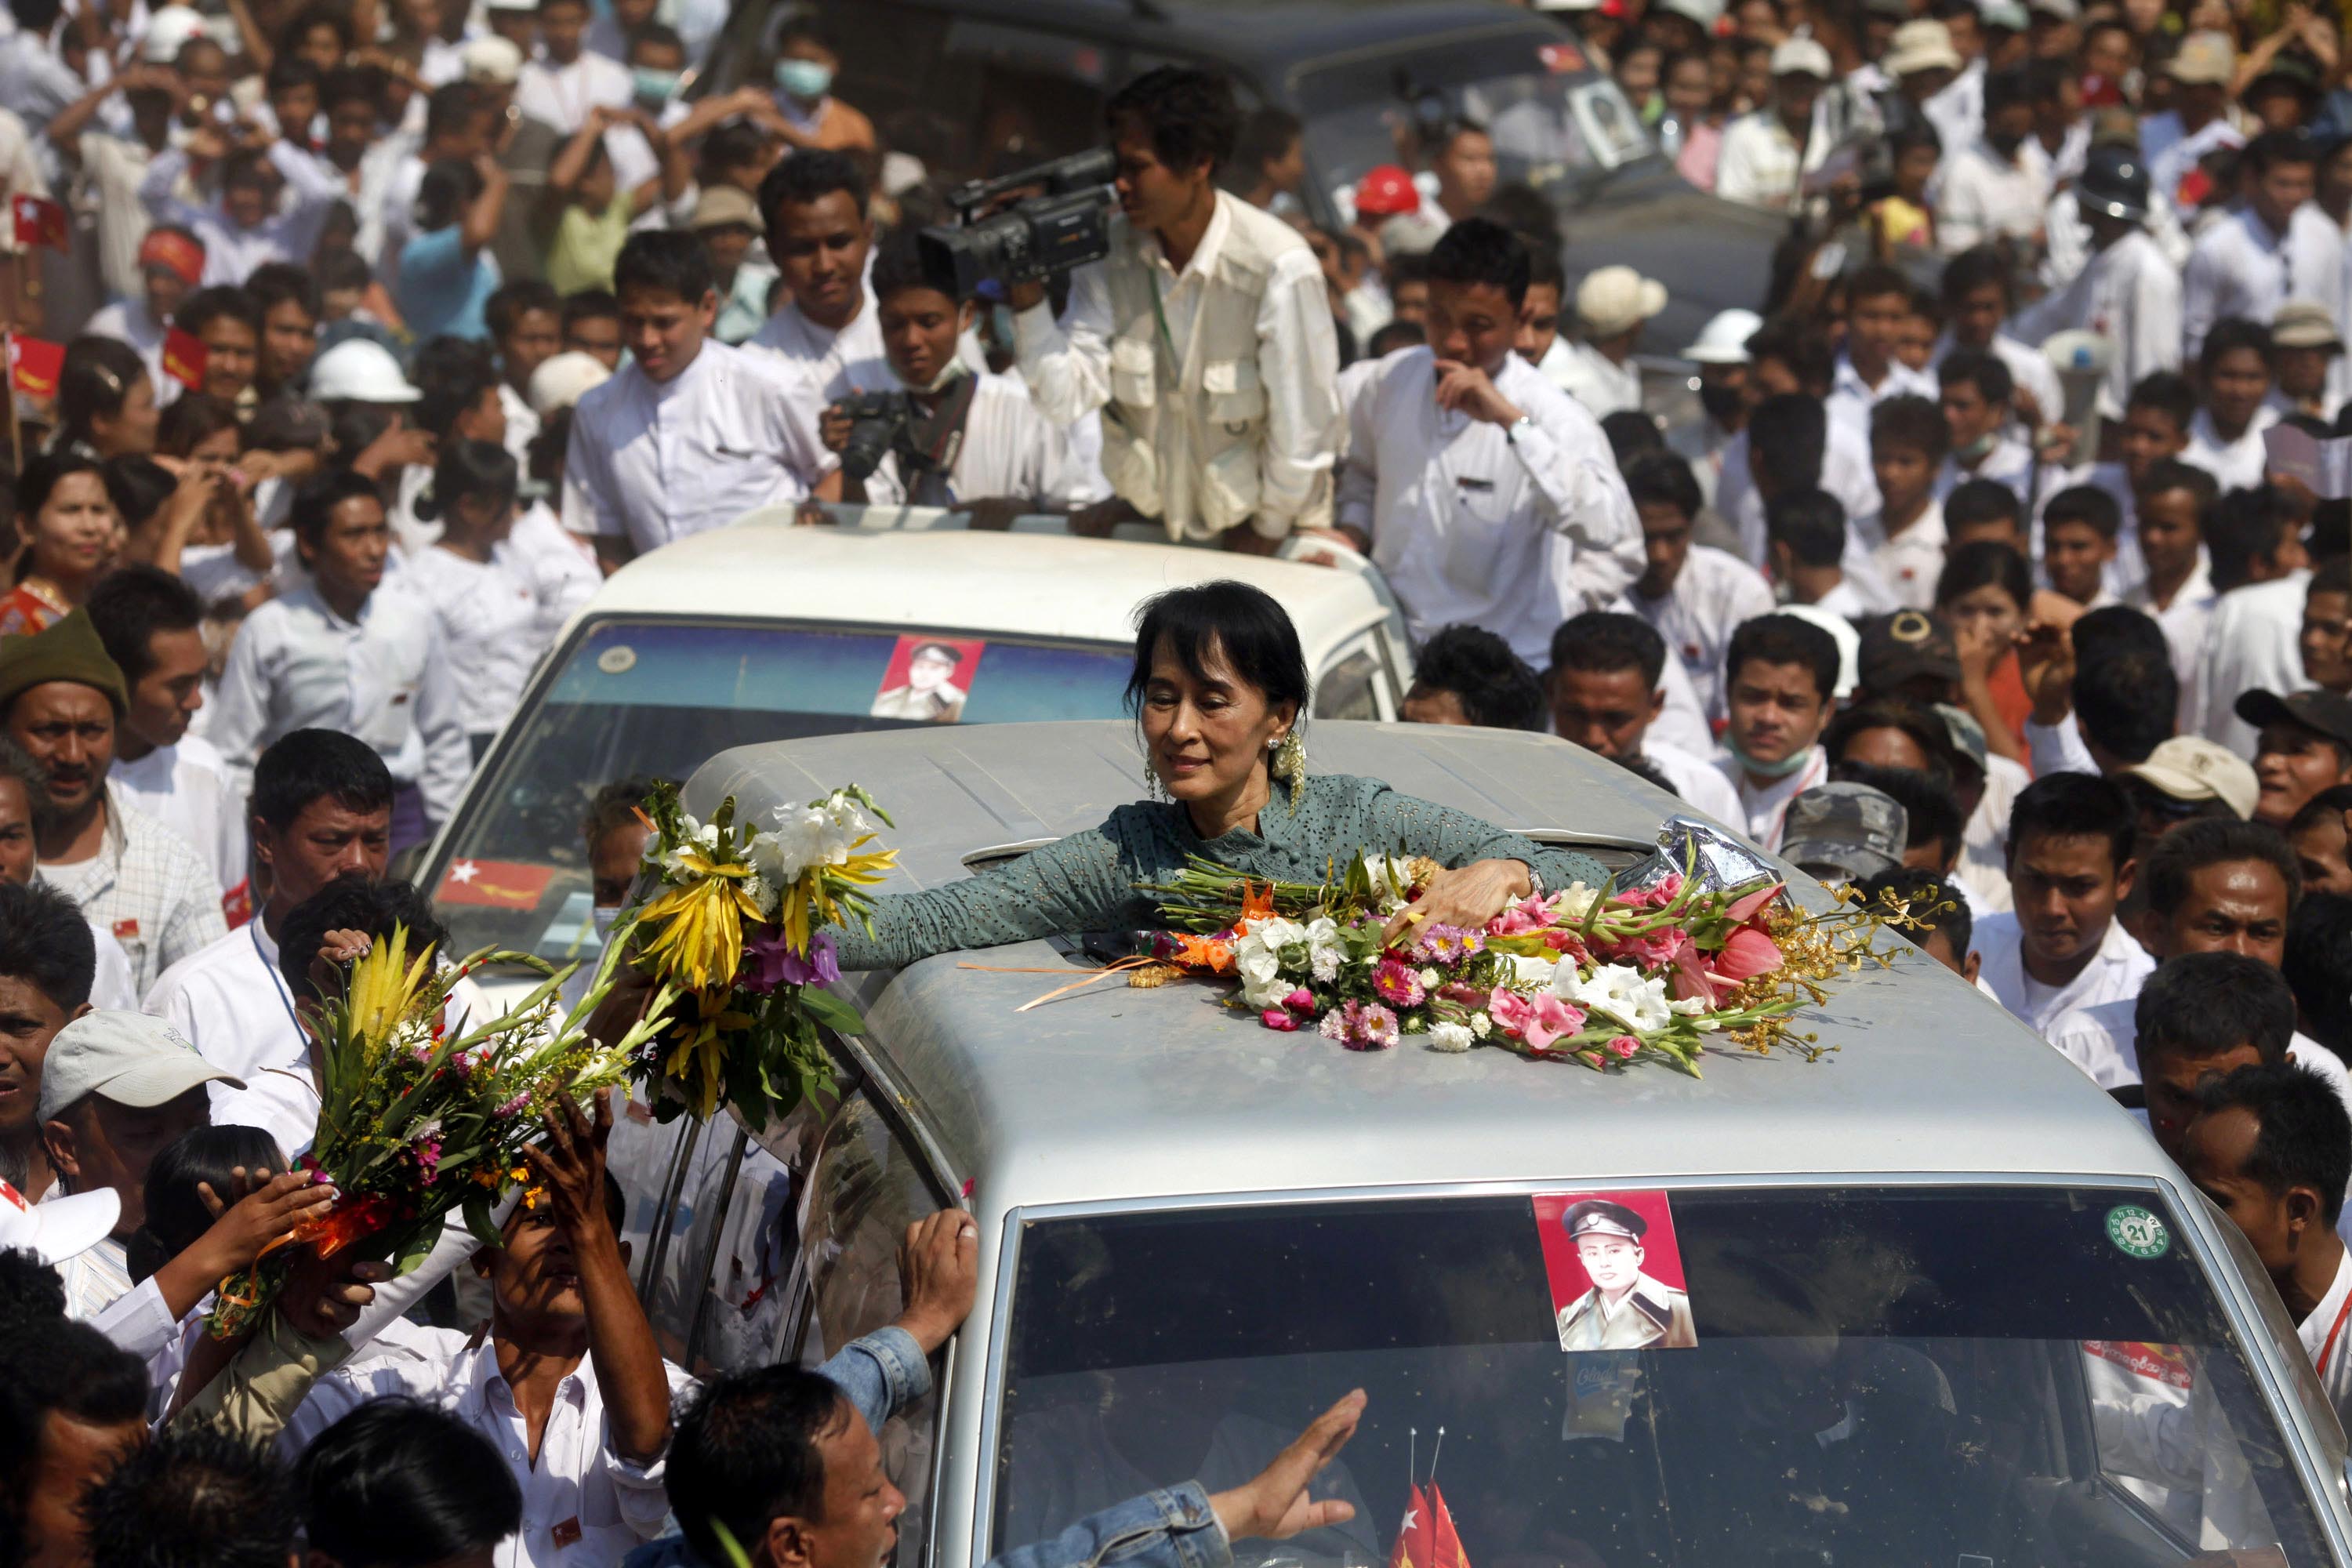 aung-san-suu-kyi-greeted-by-supporters-data.jpg